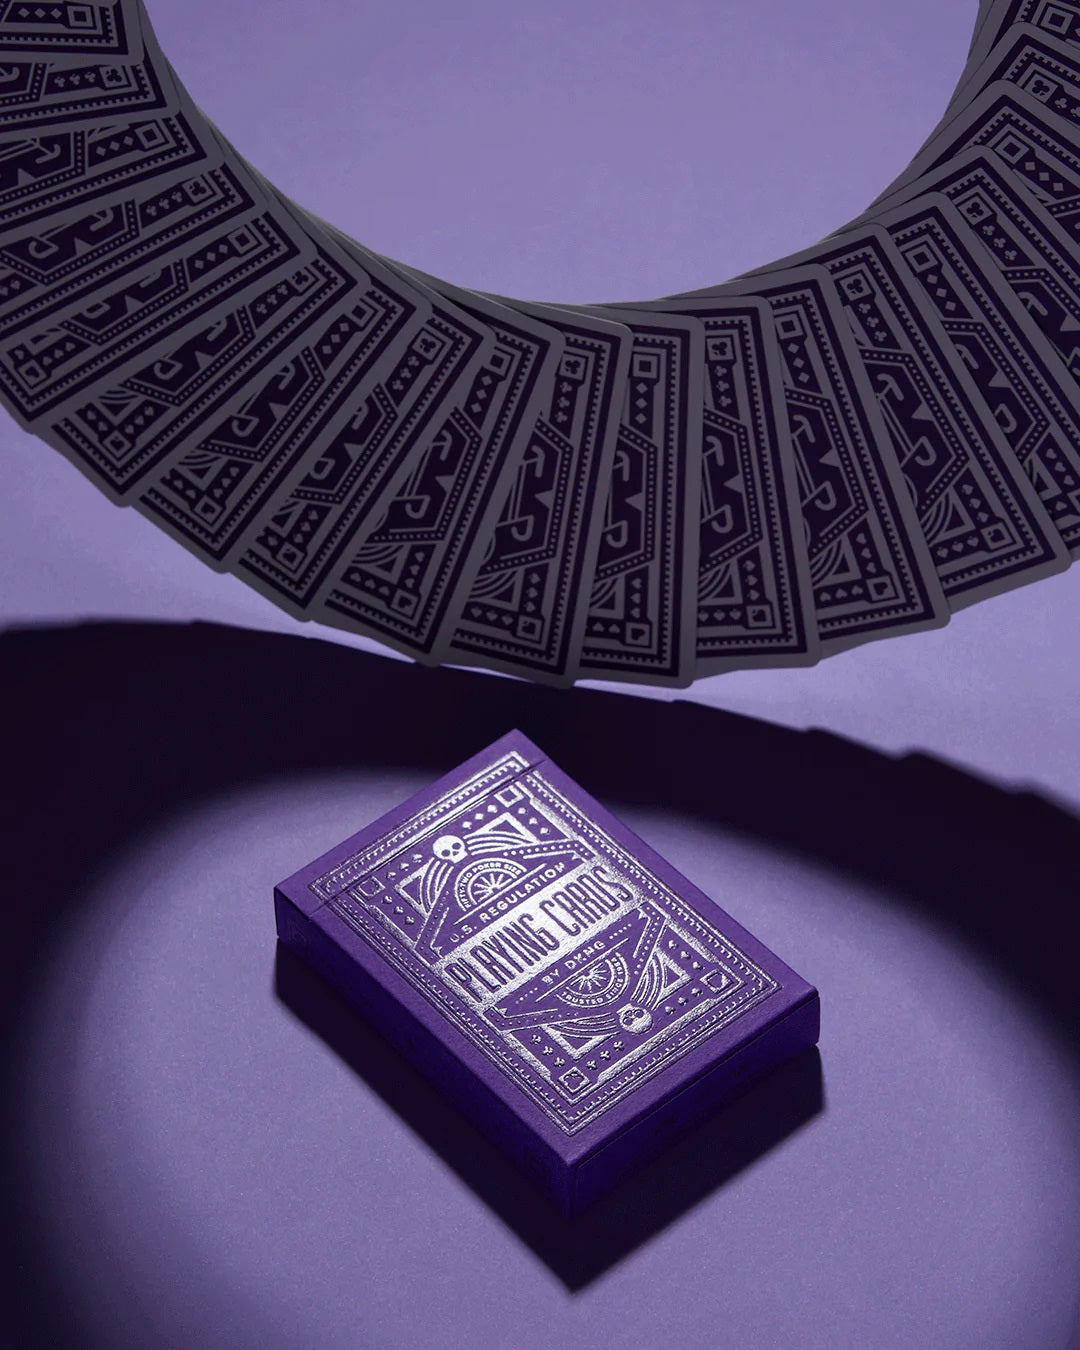 DKNG Purple Wheel Limited Edition Deck by Art of Play